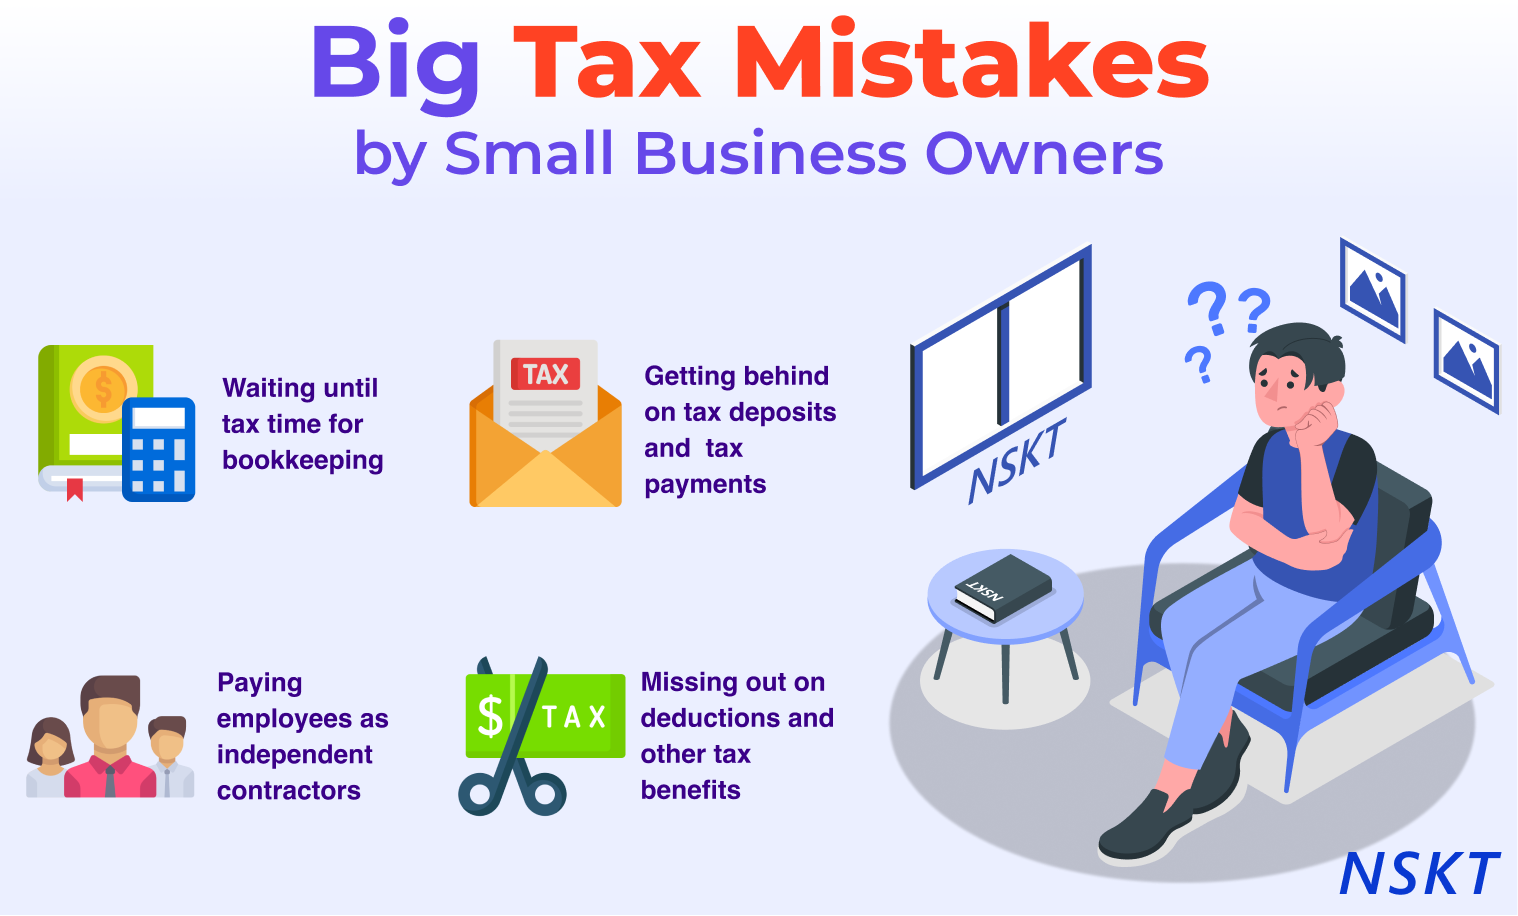 Big Tax Mistakes Small Business Owners Make when starting